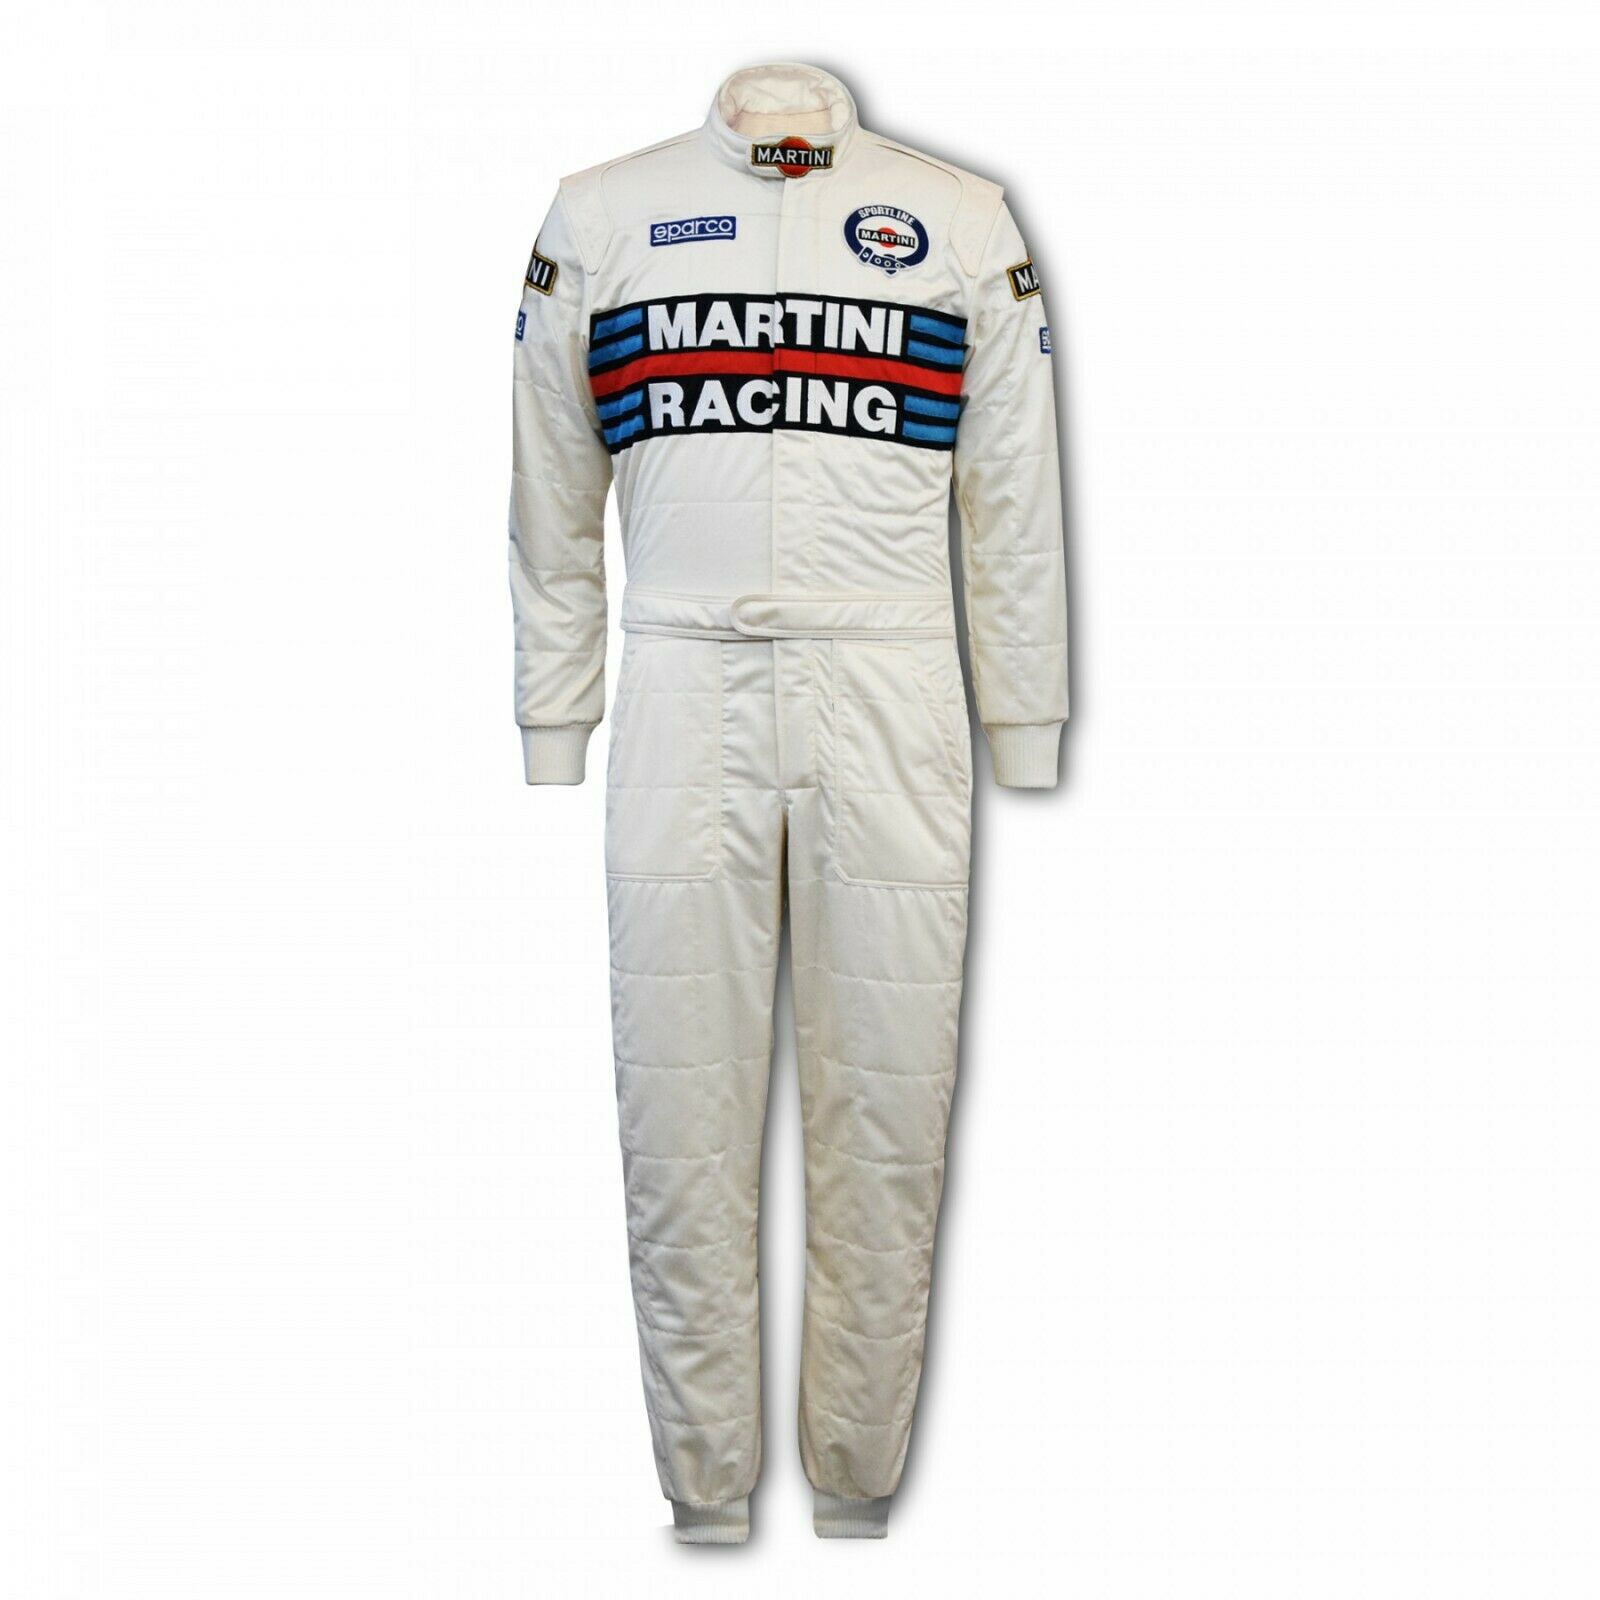 Races Suit in White